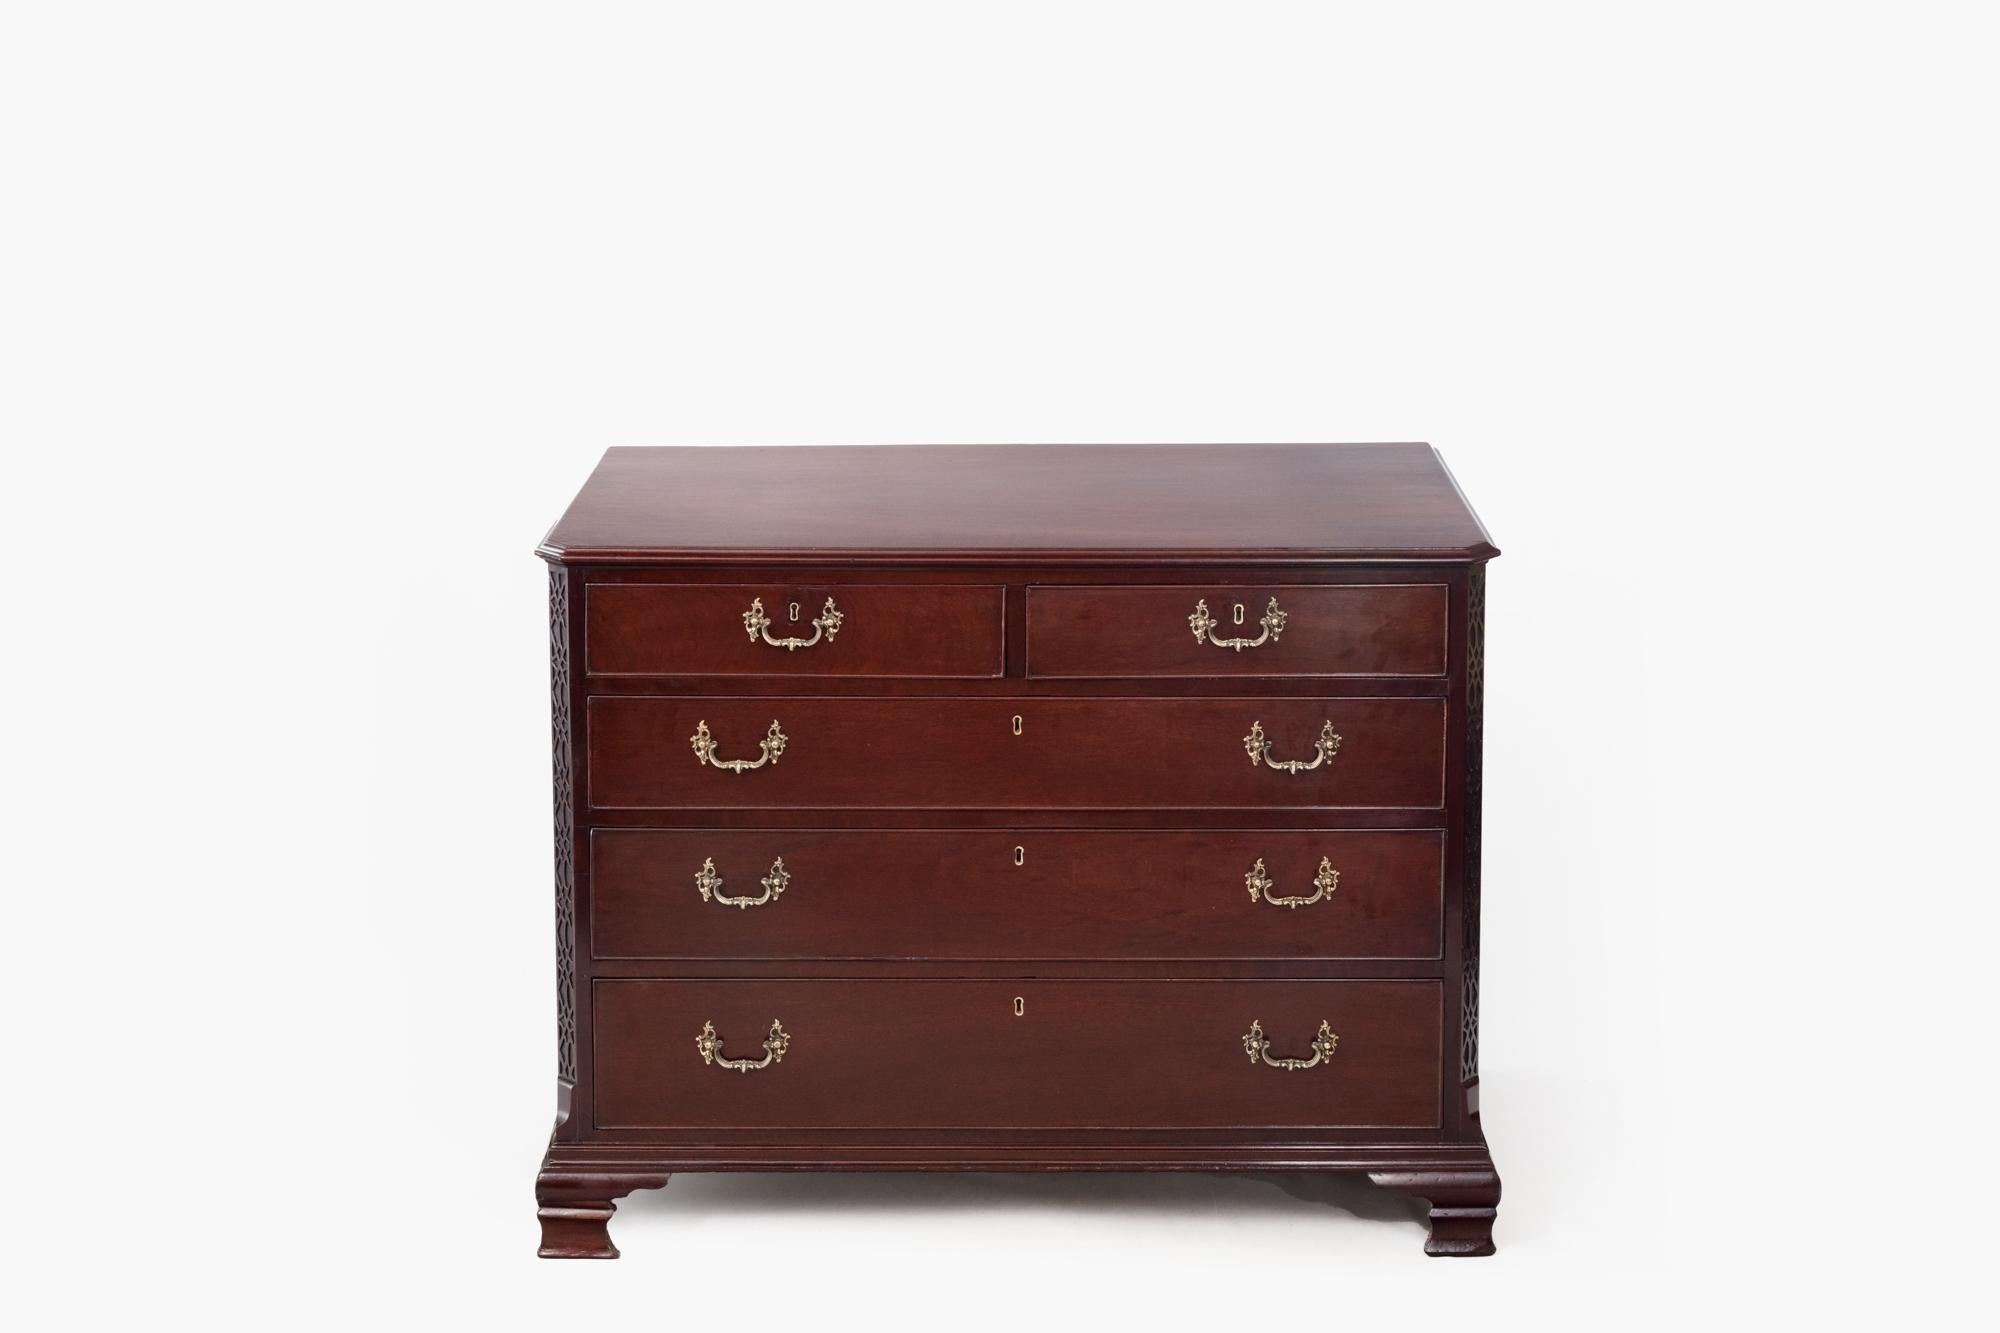 19th Century Georgian Mahogany Commode In Excellent Condition For Sale In Dublin 8, IE